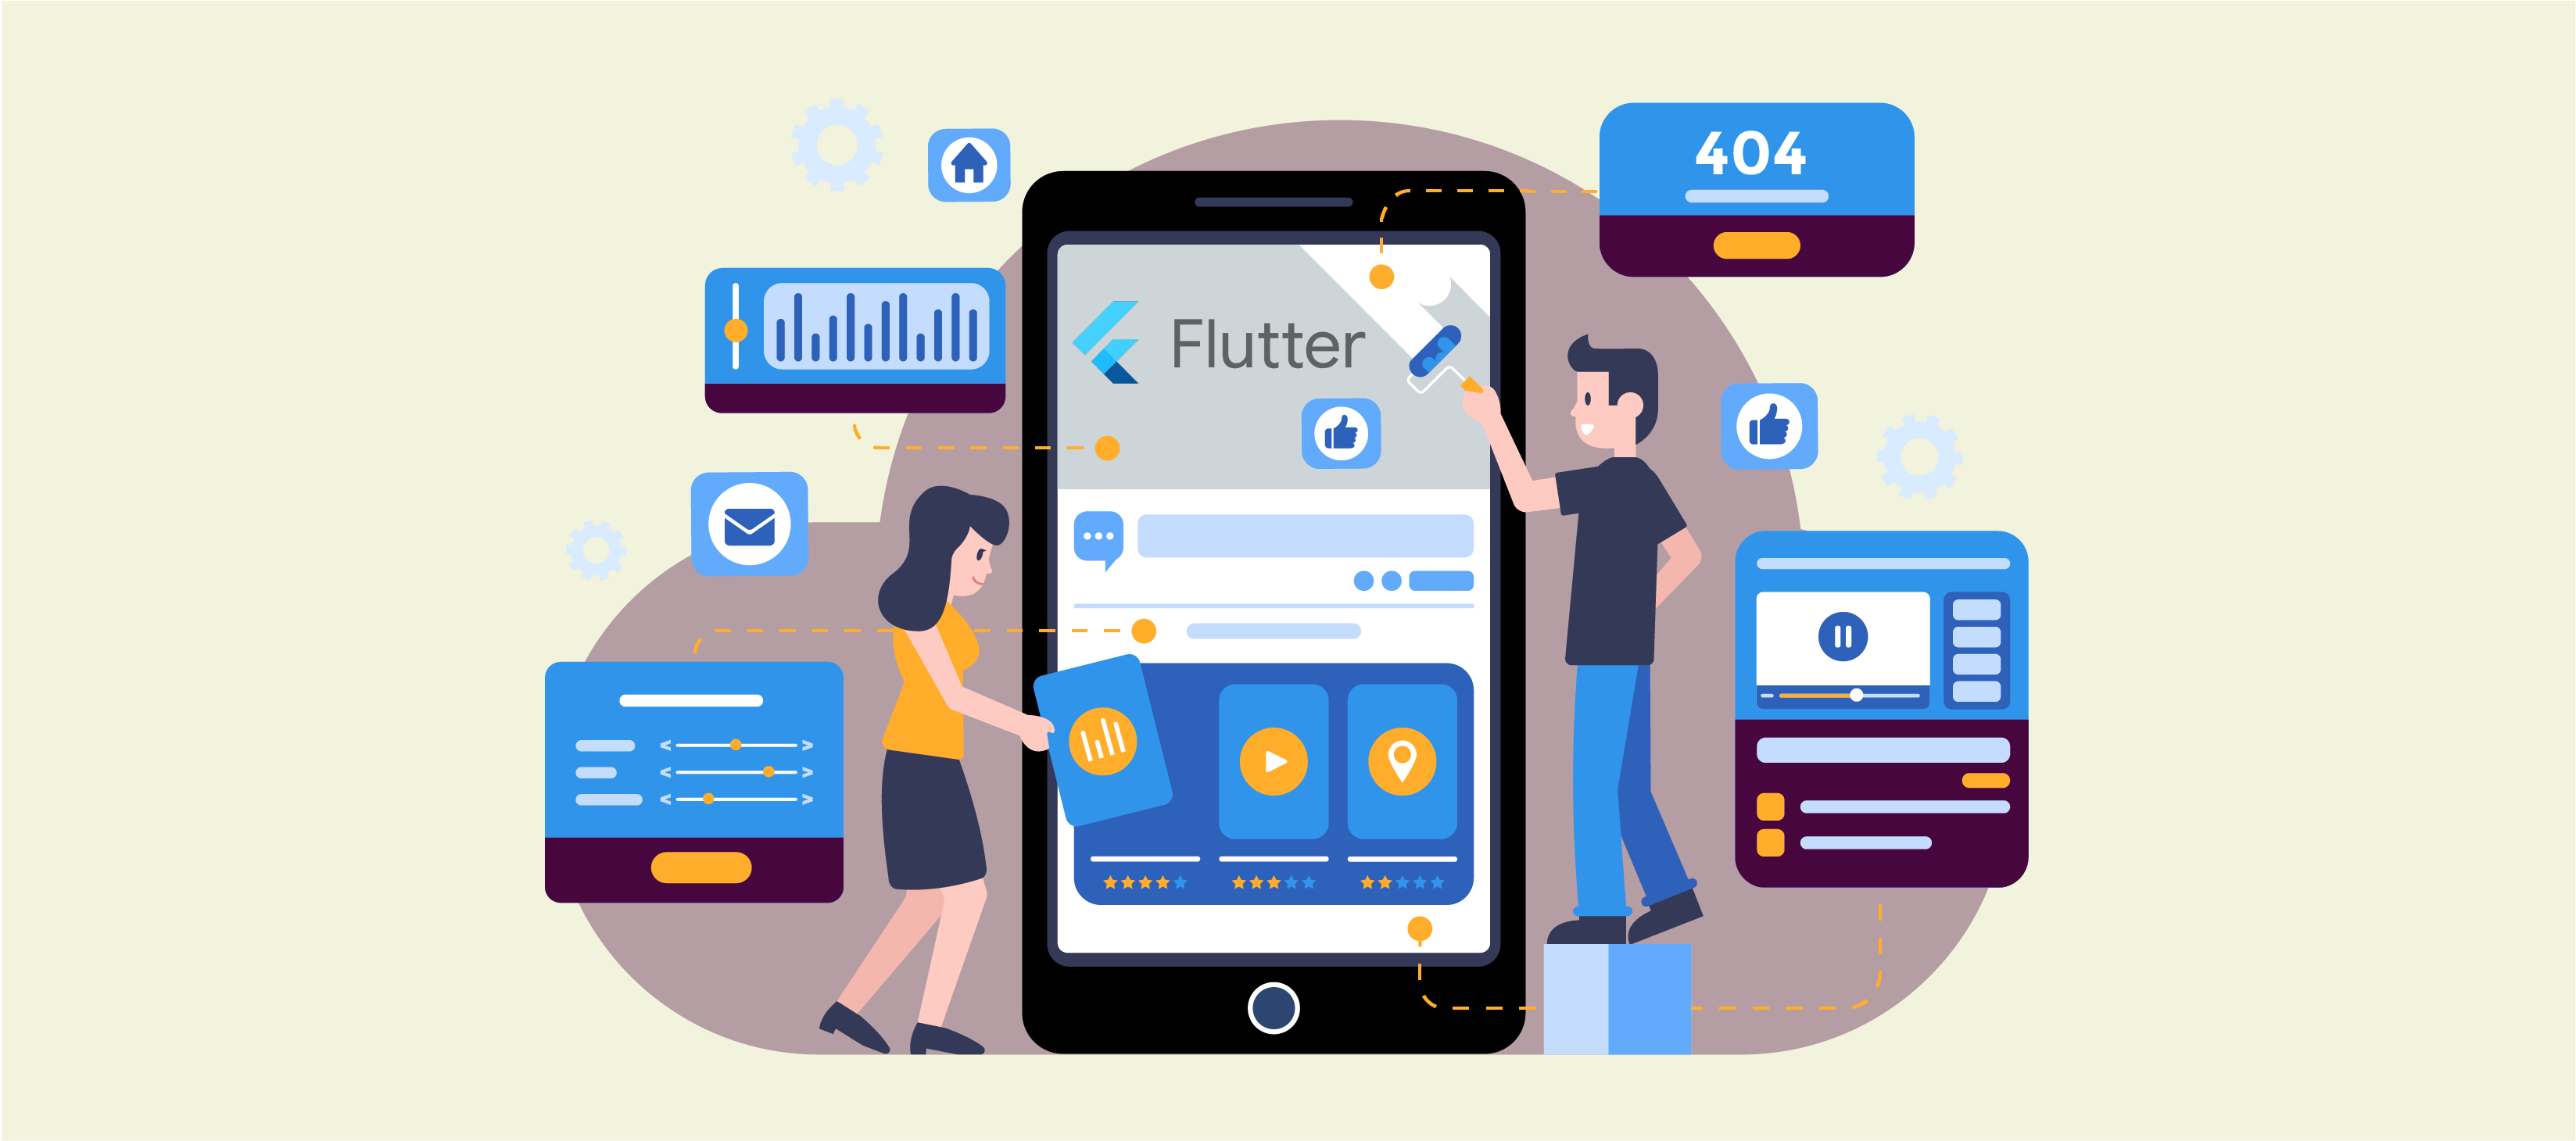 Why Does Flutter Development Excite You the Most